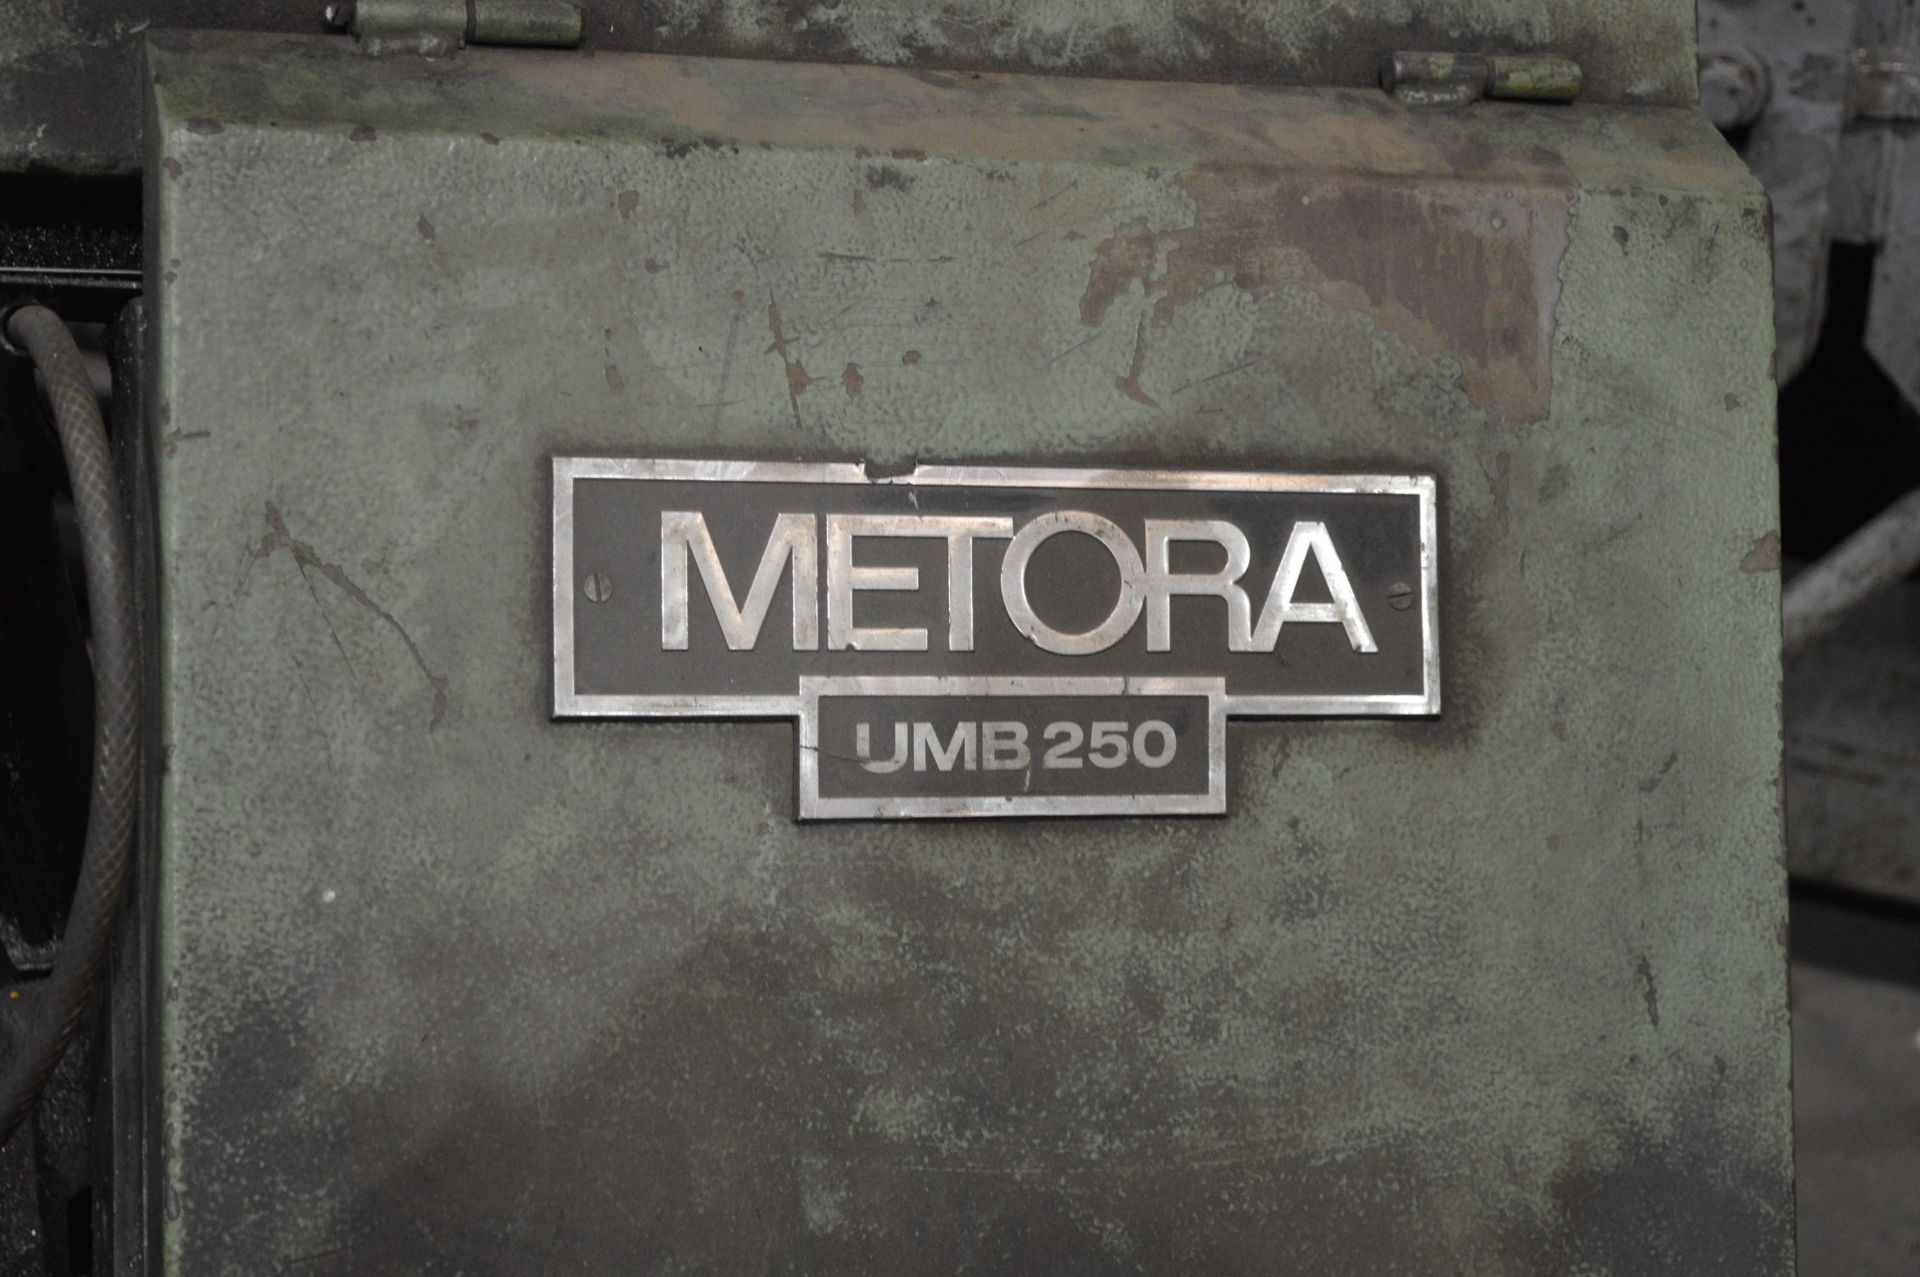 Startrite Metora UMB250 Horizontal Band Saw, serial no. 5180166, with four roller feed stands - Image 5 of 8